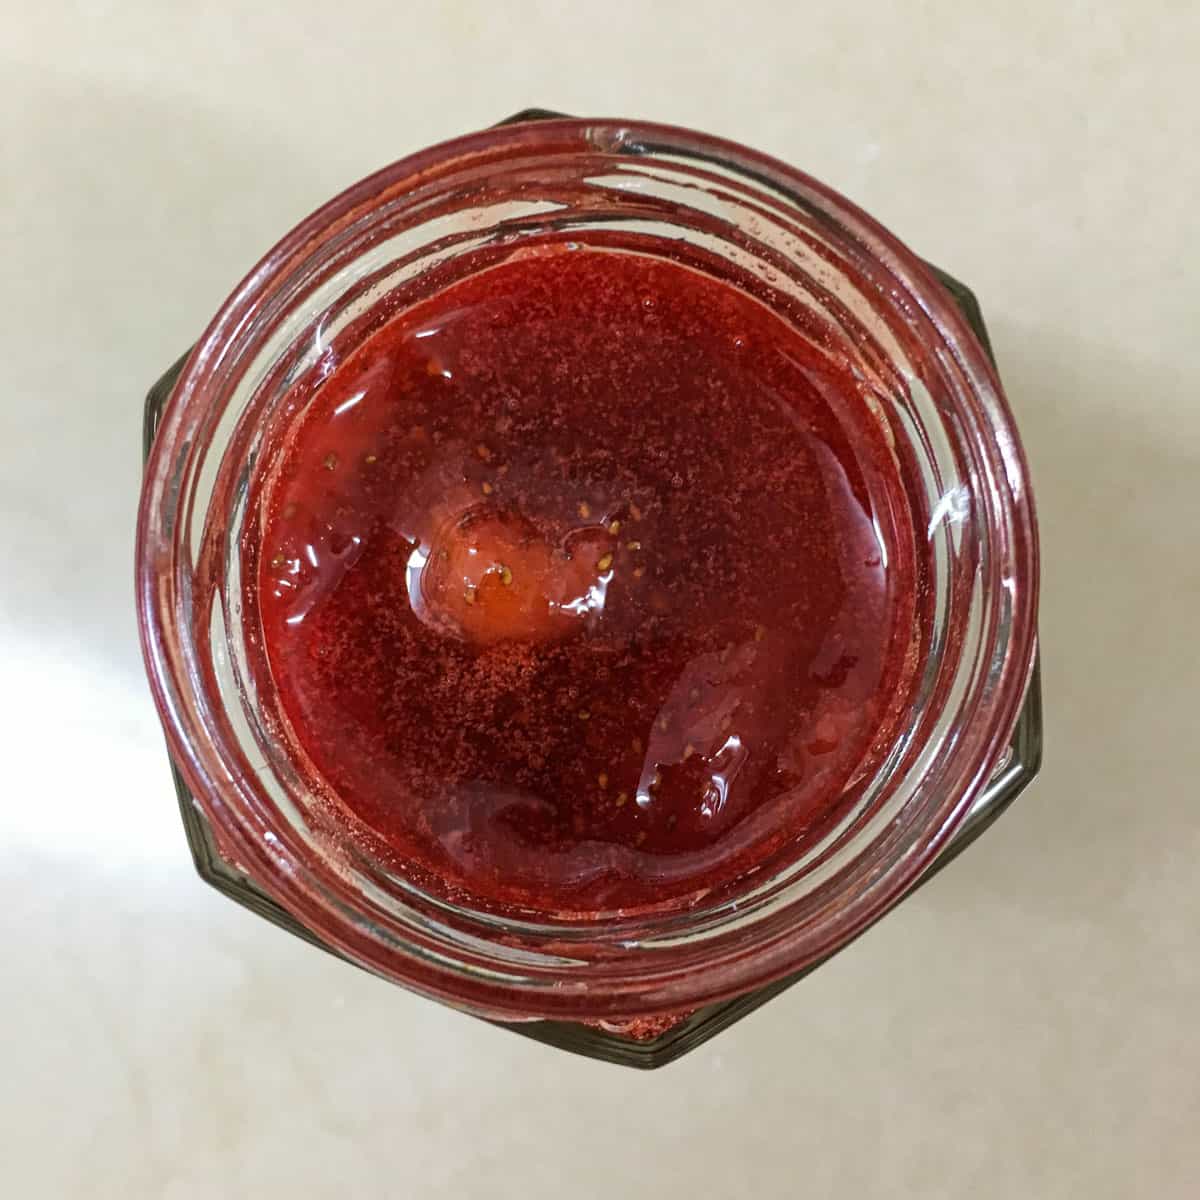 Top view of a jar of strawberry filling